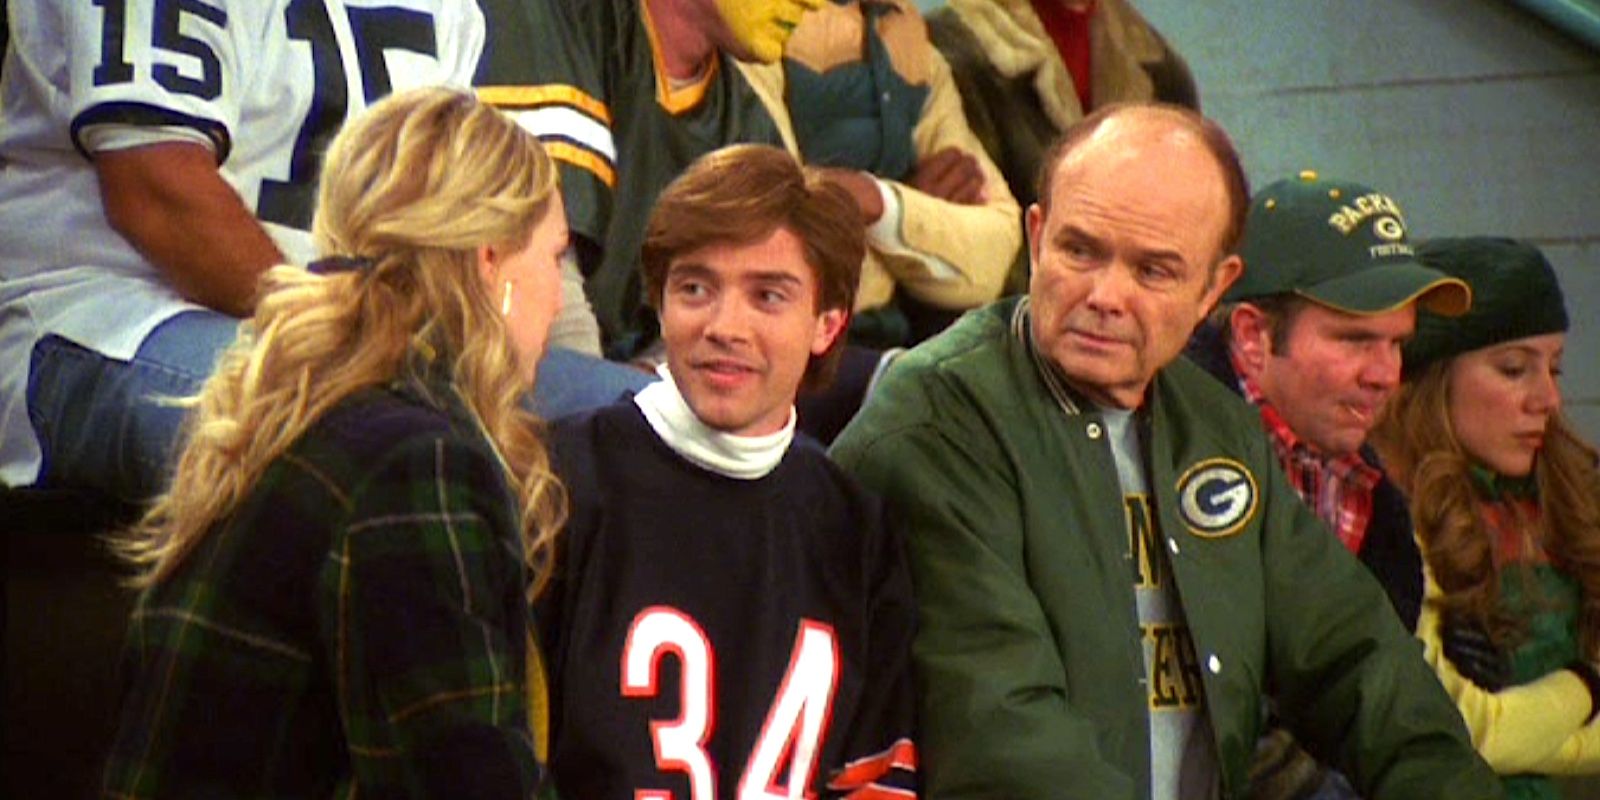 That ‘90s Show Can Finally Fulfill Red’s Biggest Obsession